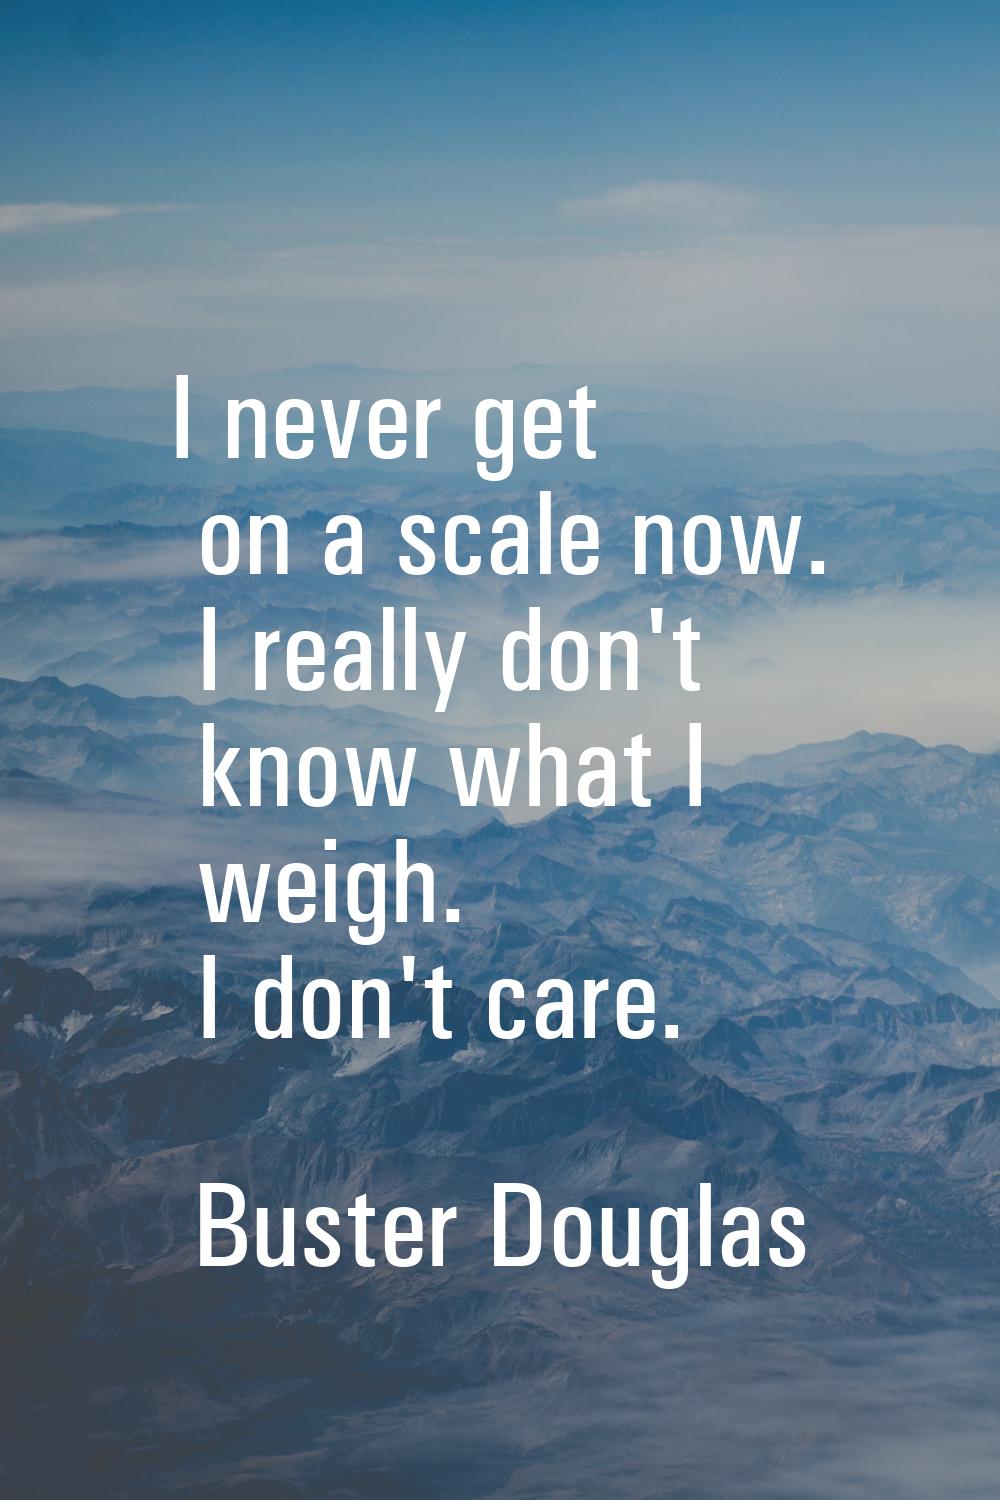 I never get on a scale now. I really don't know what I weigh. I don't care.